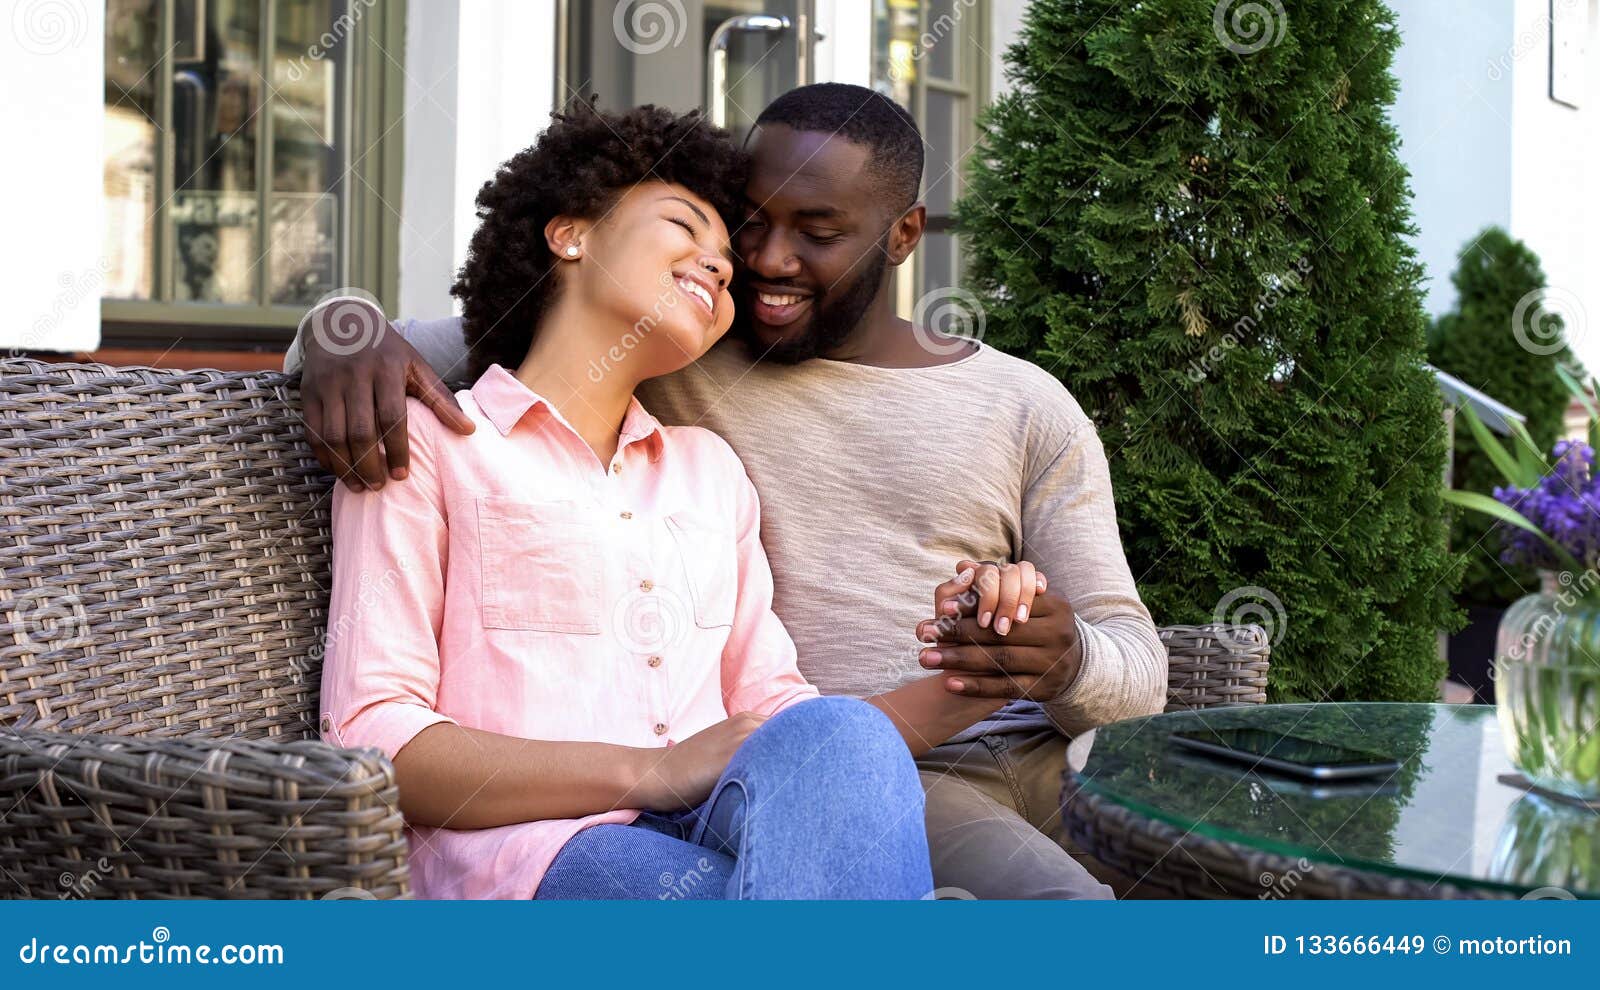 cheerful man and woman enjoying romantic date, sitting at cafe, relationship